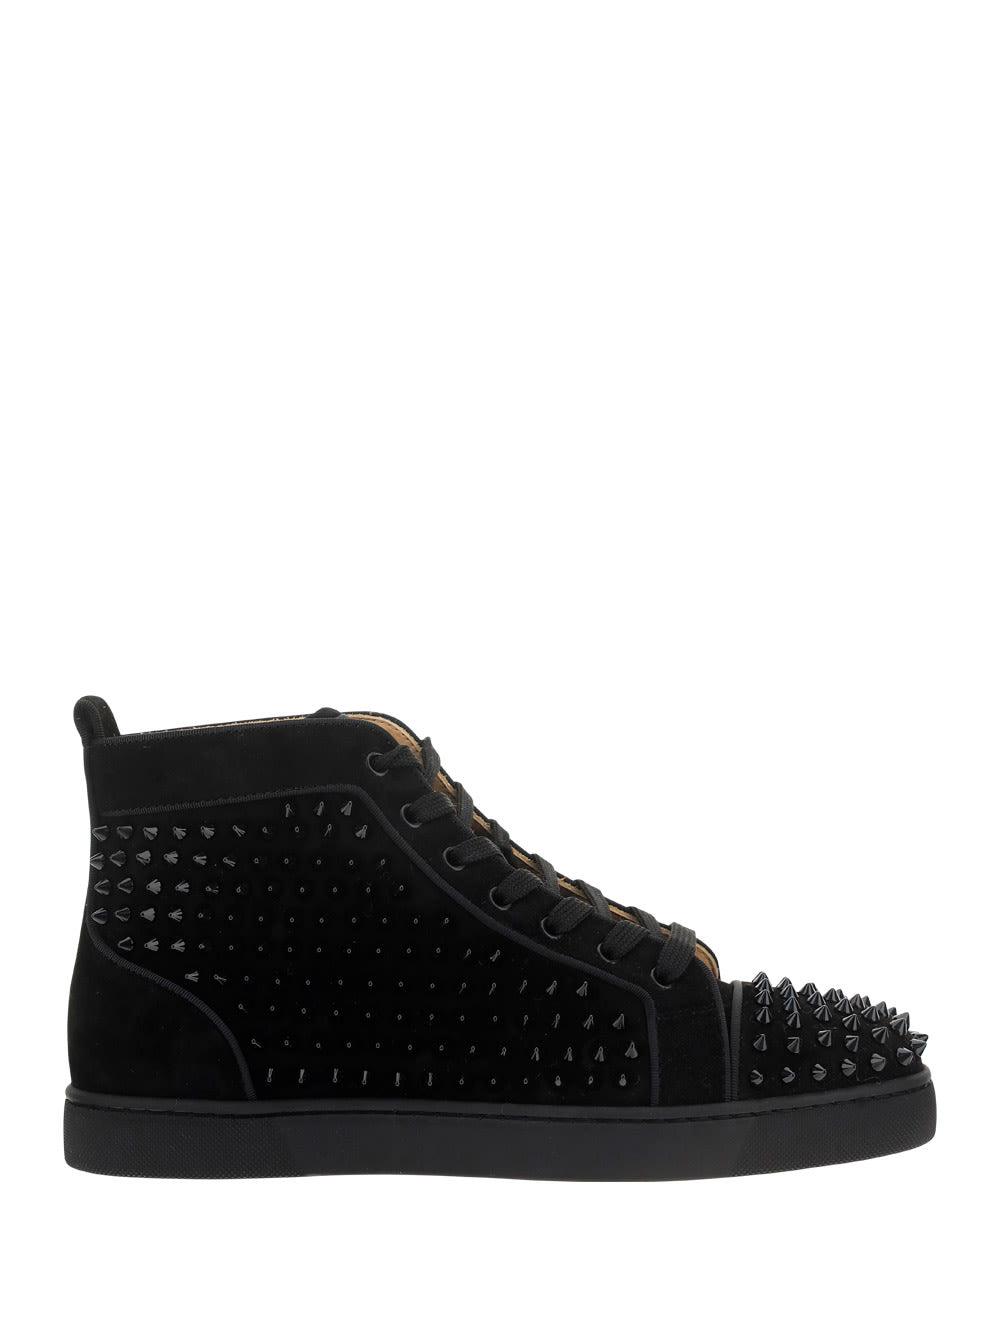 Christian Louboutin - Louis Orlato Suede and Mesh High-Top Trainers - Mens - Black White